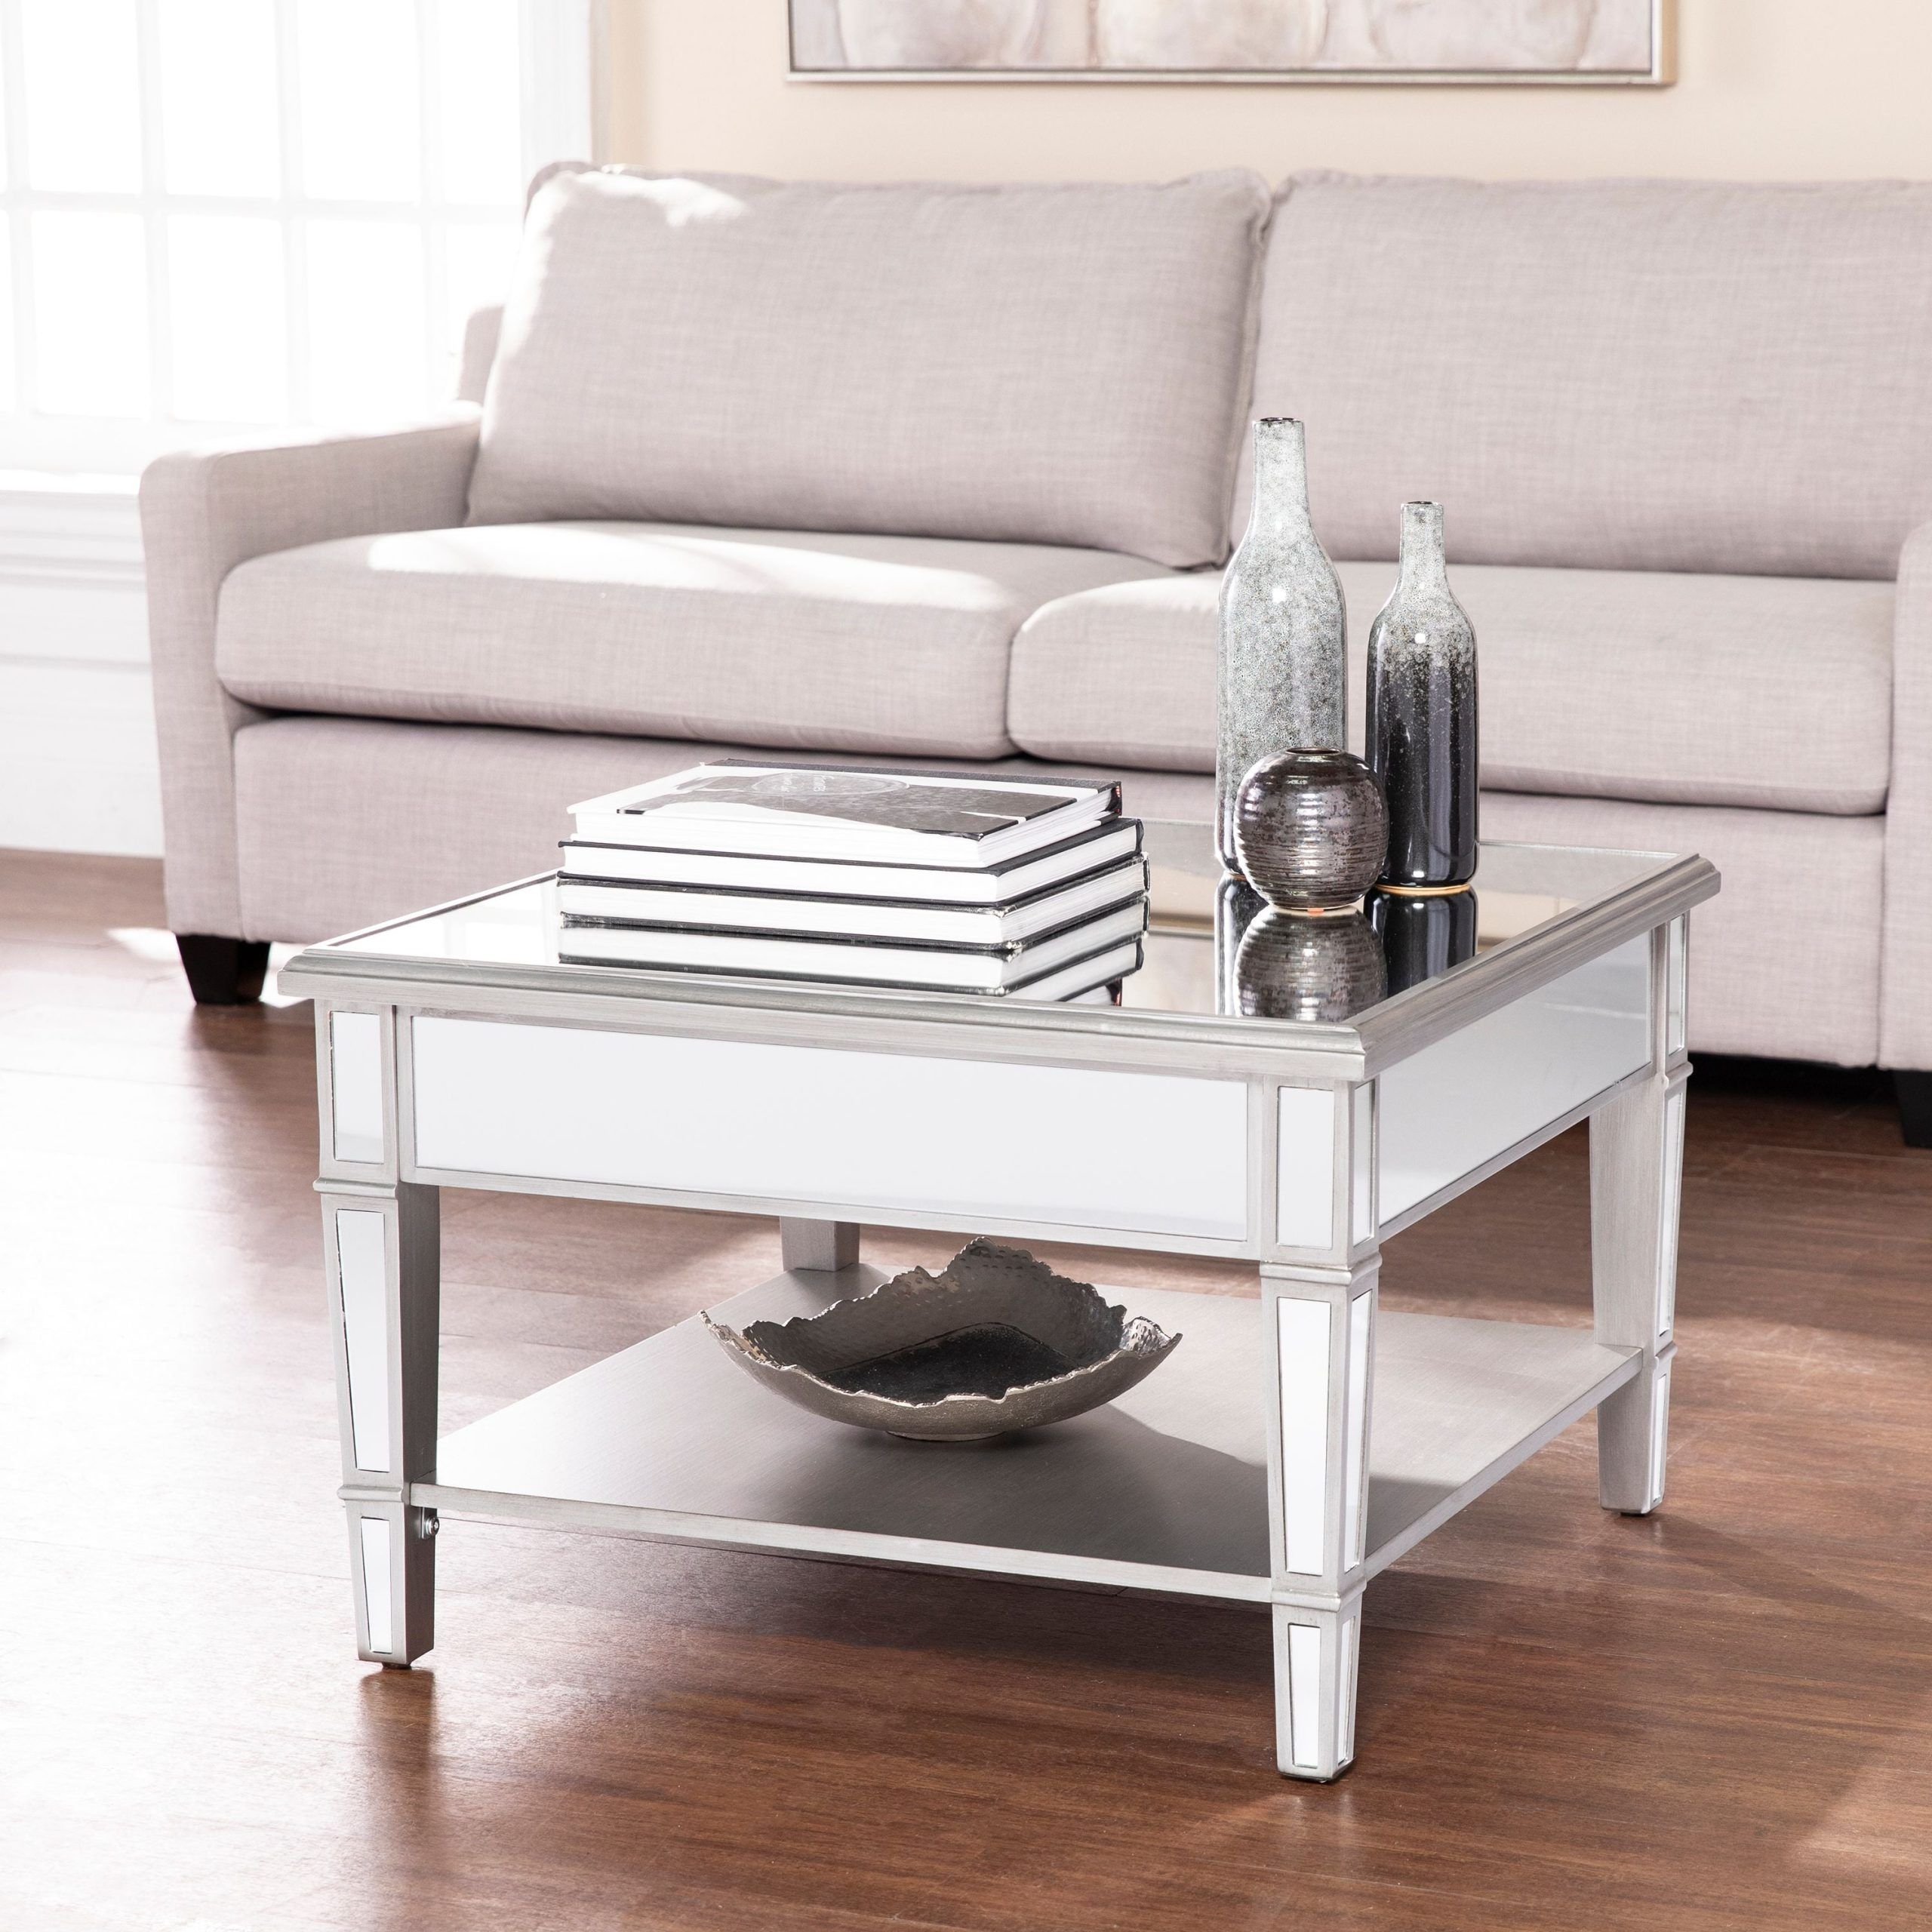 Ember Interiors Larksmill Mirrored Console Table, Silver – Walmart With Southern Enterprises Larksmill Coffee Tables (Photo 4 of 6)